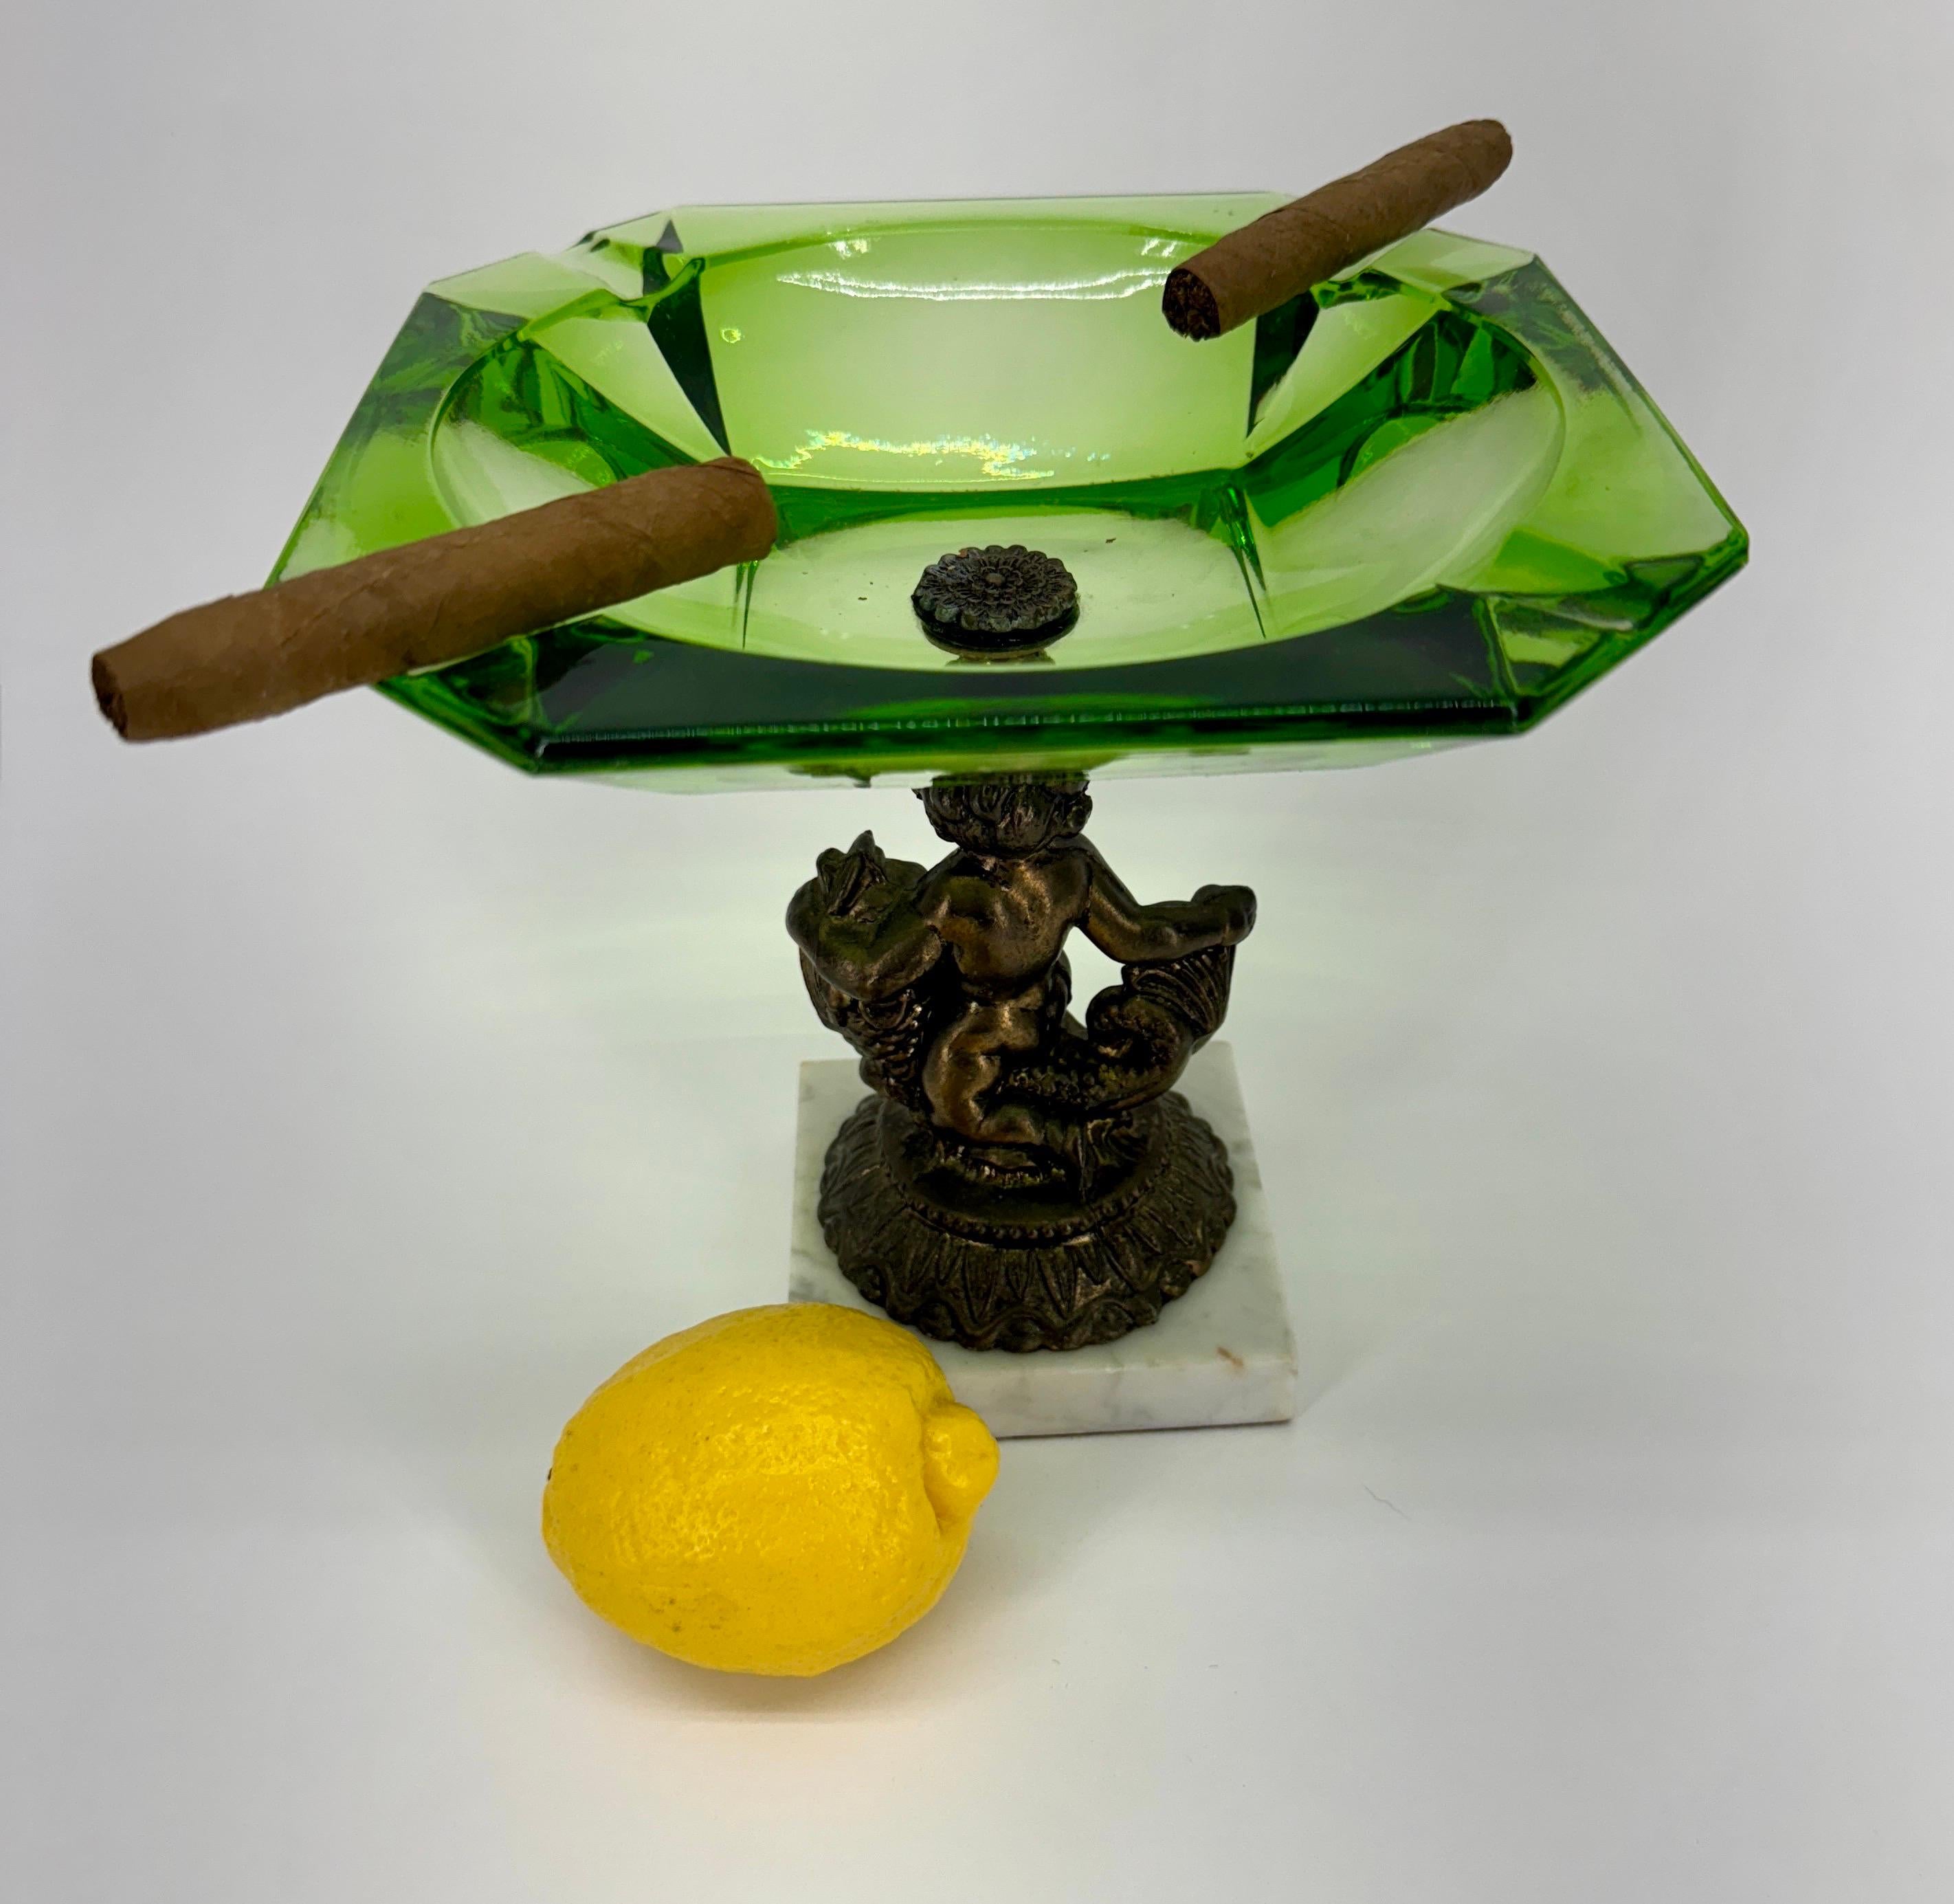 Emerald Green Glass Cigar or Cigarette Ashtray with Bronze Putti Sculpture

This large green glass ceramic ashtray with a cheerful bronze cherub is particular suited for large cigars. This ashtray can also be used as a unique trinket dish or jewelry